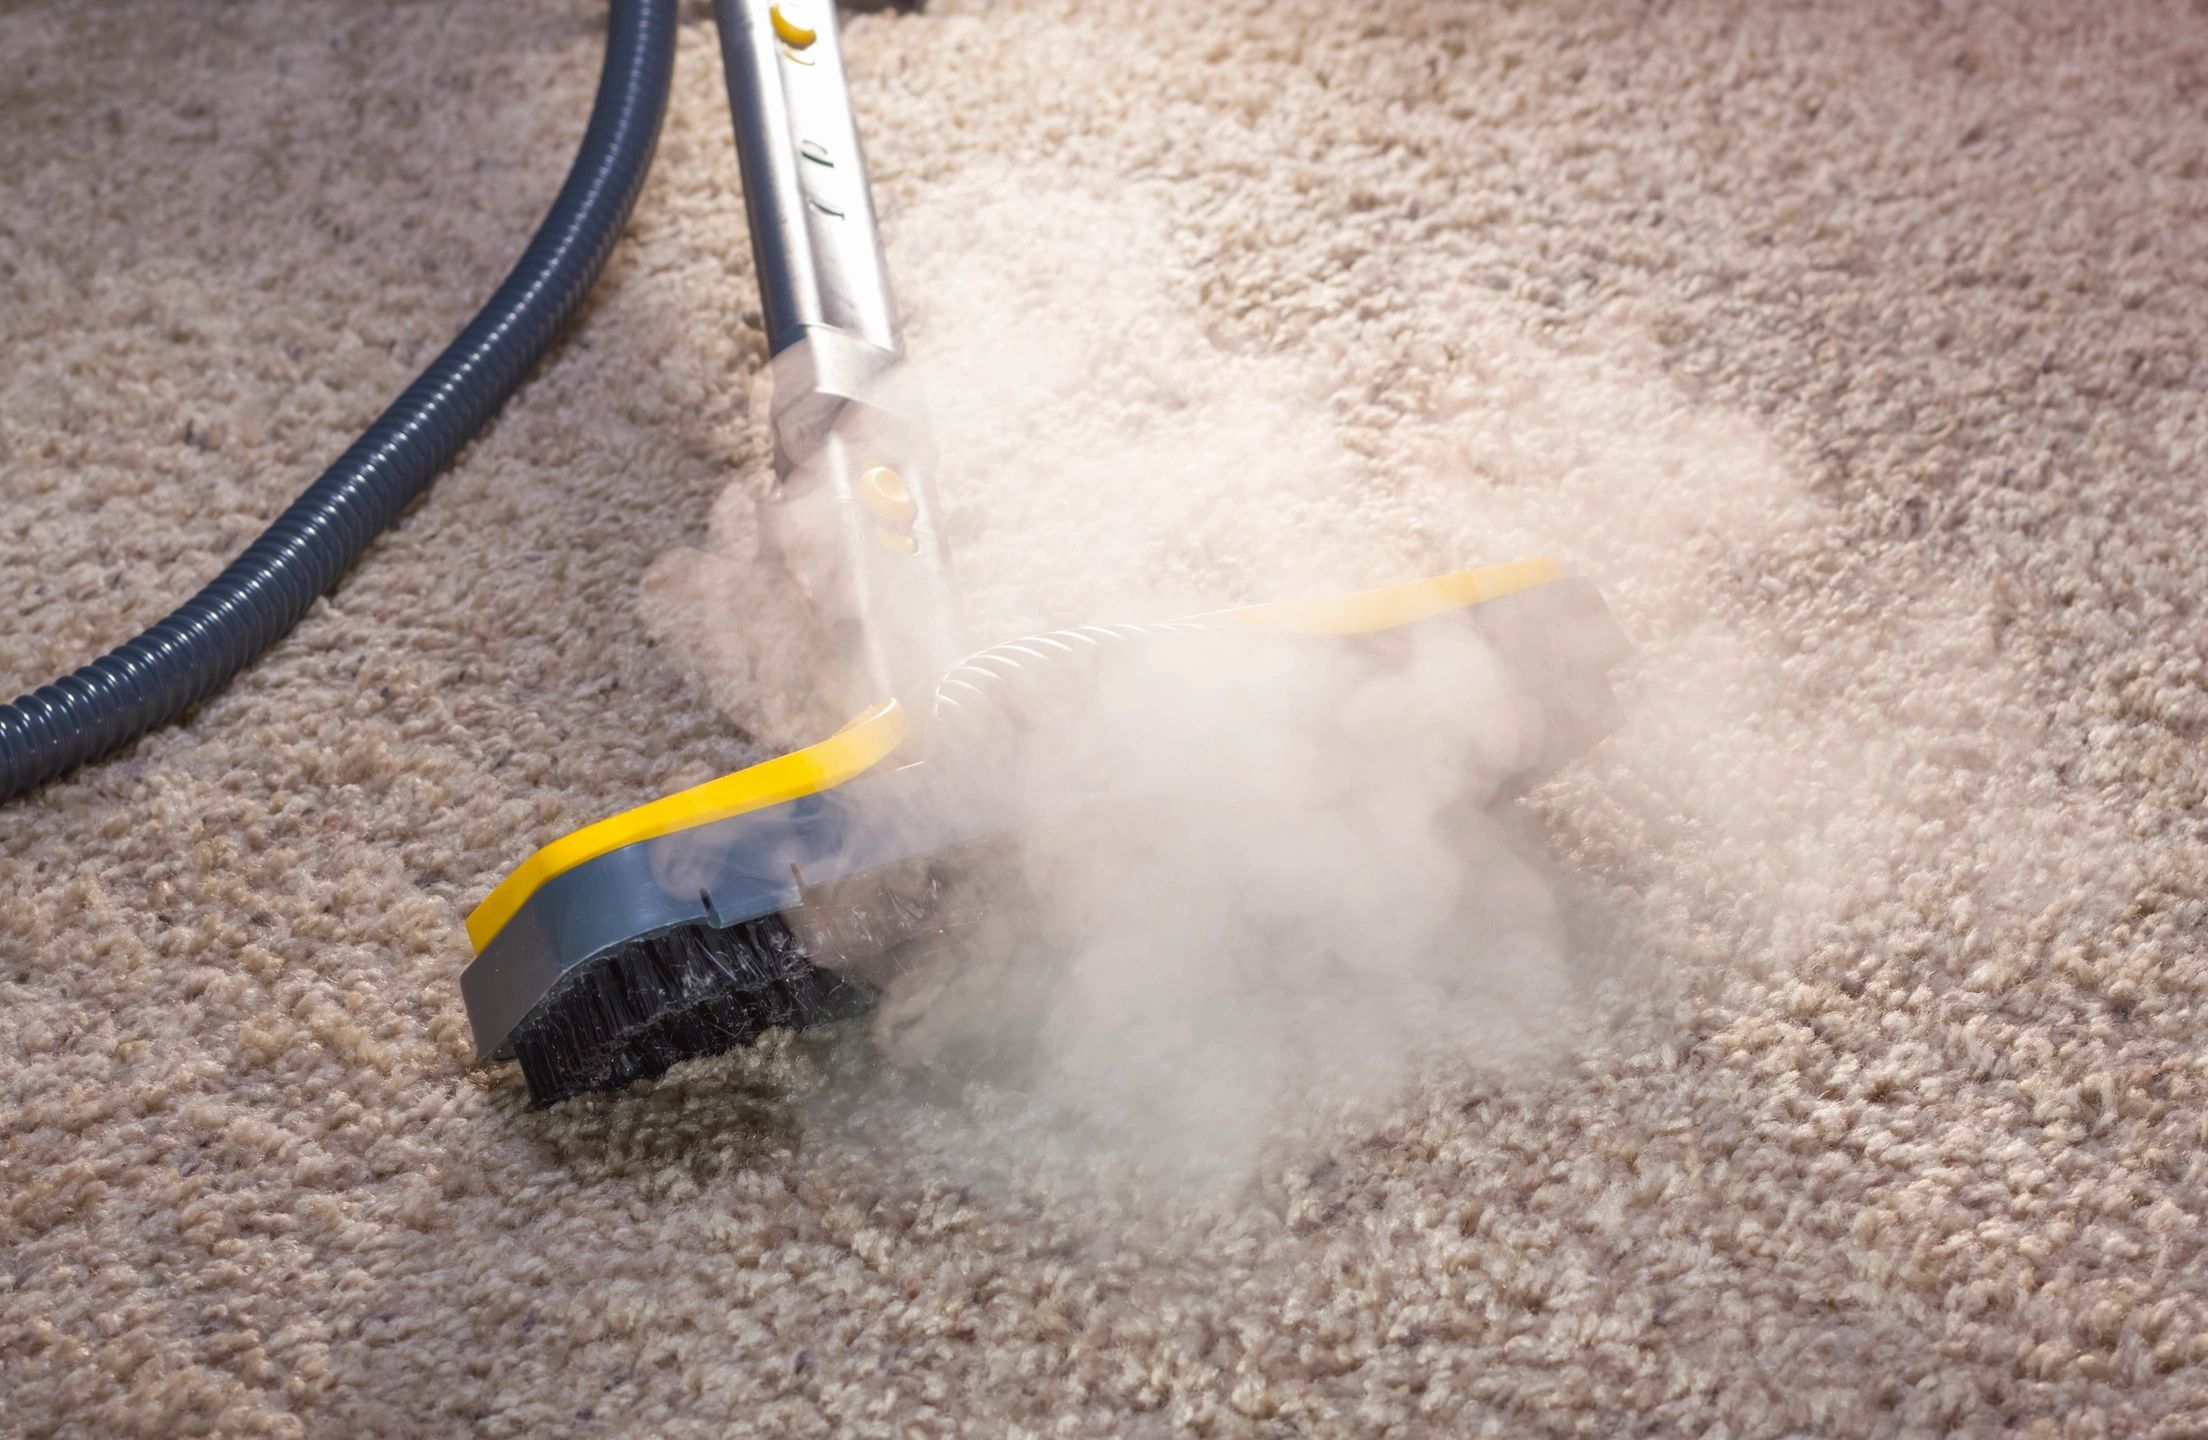 Green carpet cleaning, Commercial Cleaning, Janitorial Service, Green Cleaning, Bleach Spot repair